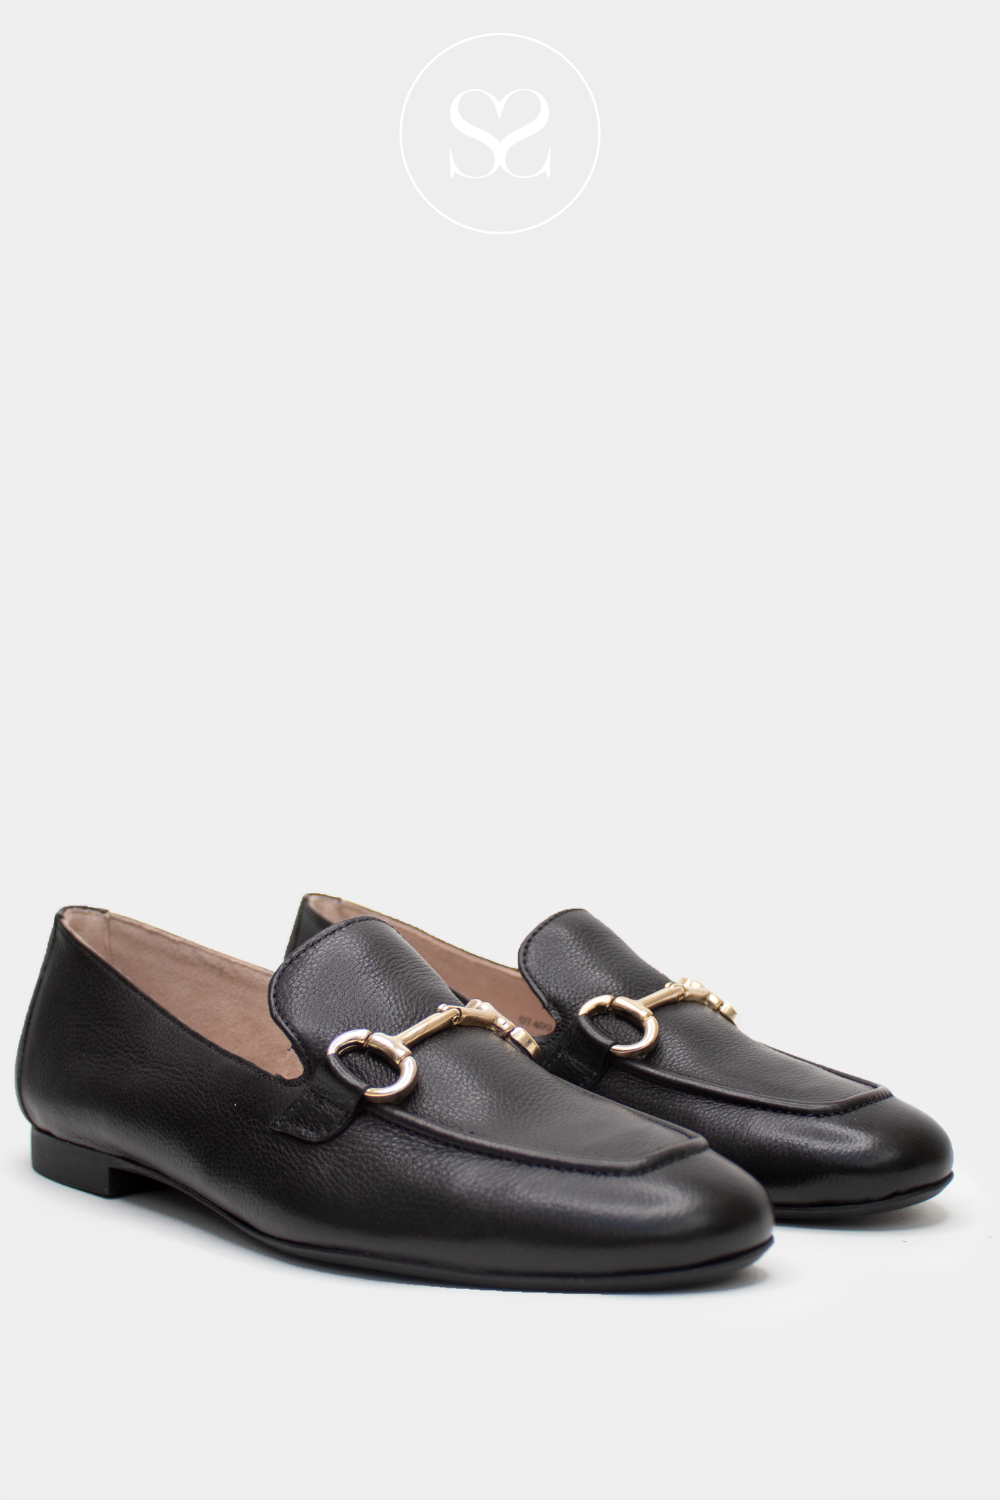 PAUL GREEN 2596 FLAT PLAIN BLACK LEATHER LOAFERS WITH GOLD CHAIN